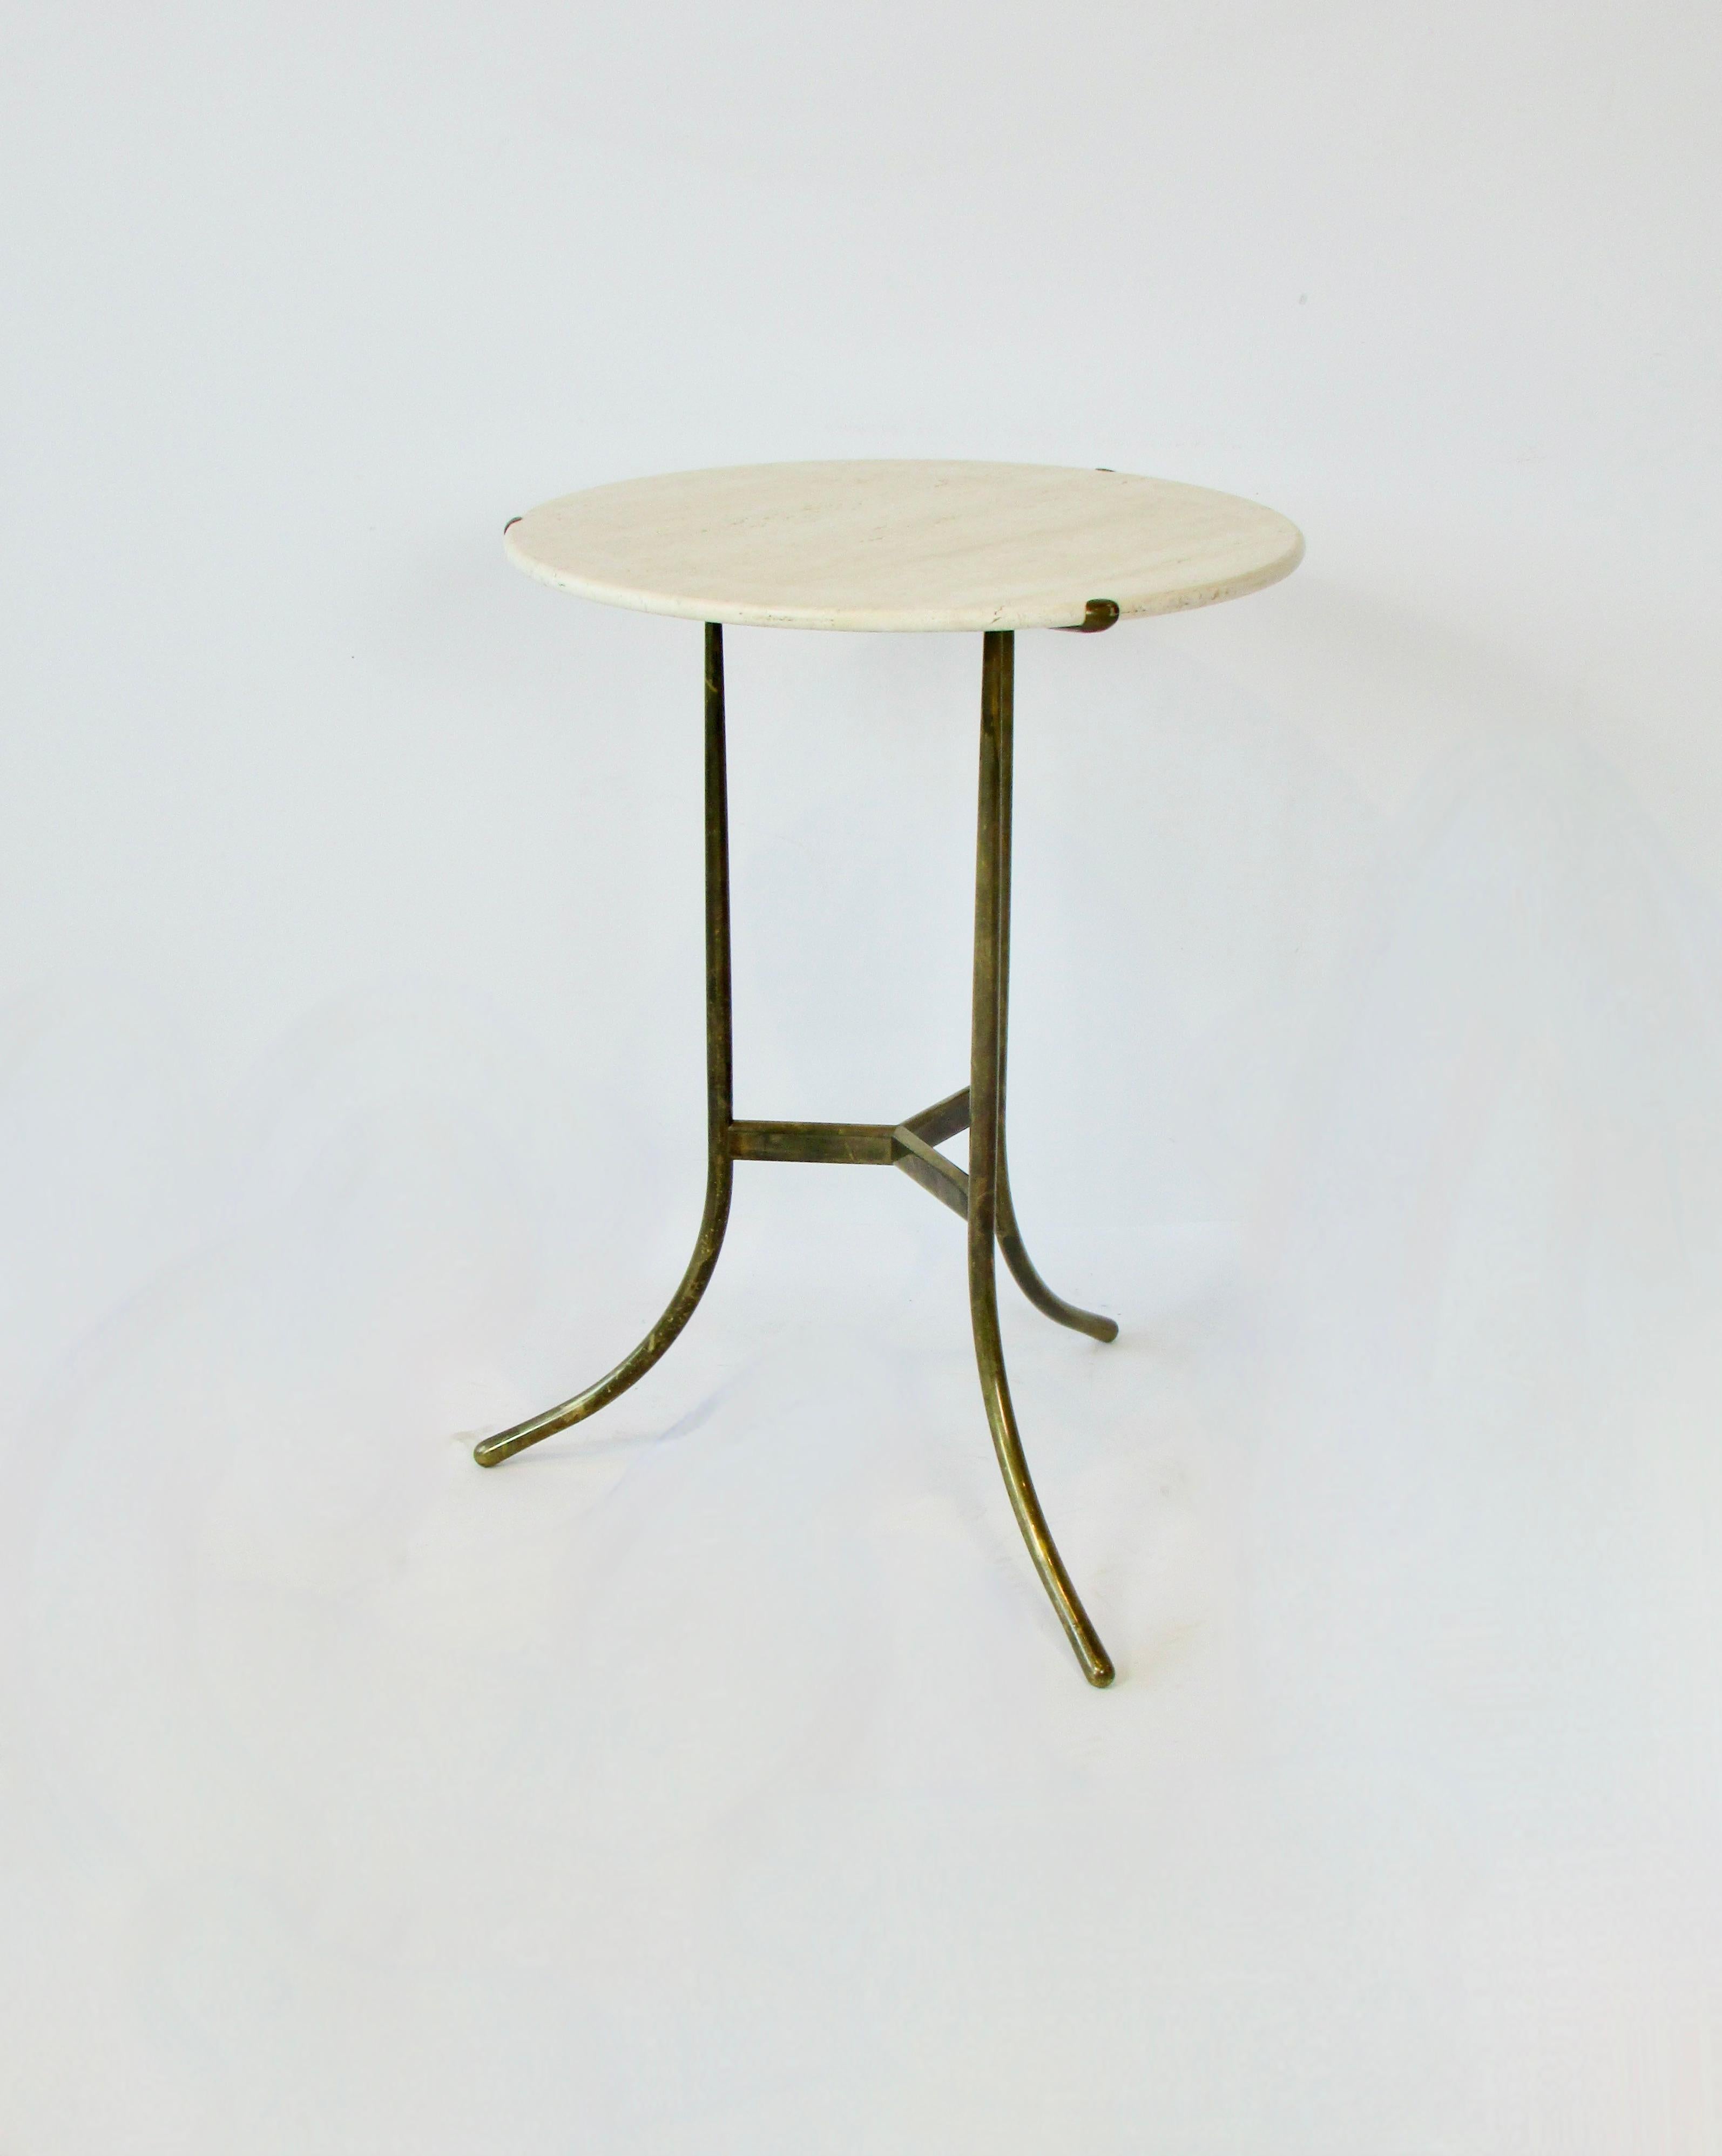  AE table stamped with Cedric Hartman signature MADE IN USA and the number 860434 . The beauty of this Travertine topped side table by Cedric Hartman is in its simple minimal aesthetic .  Three legged base of tubular bronze tapers down in diameter